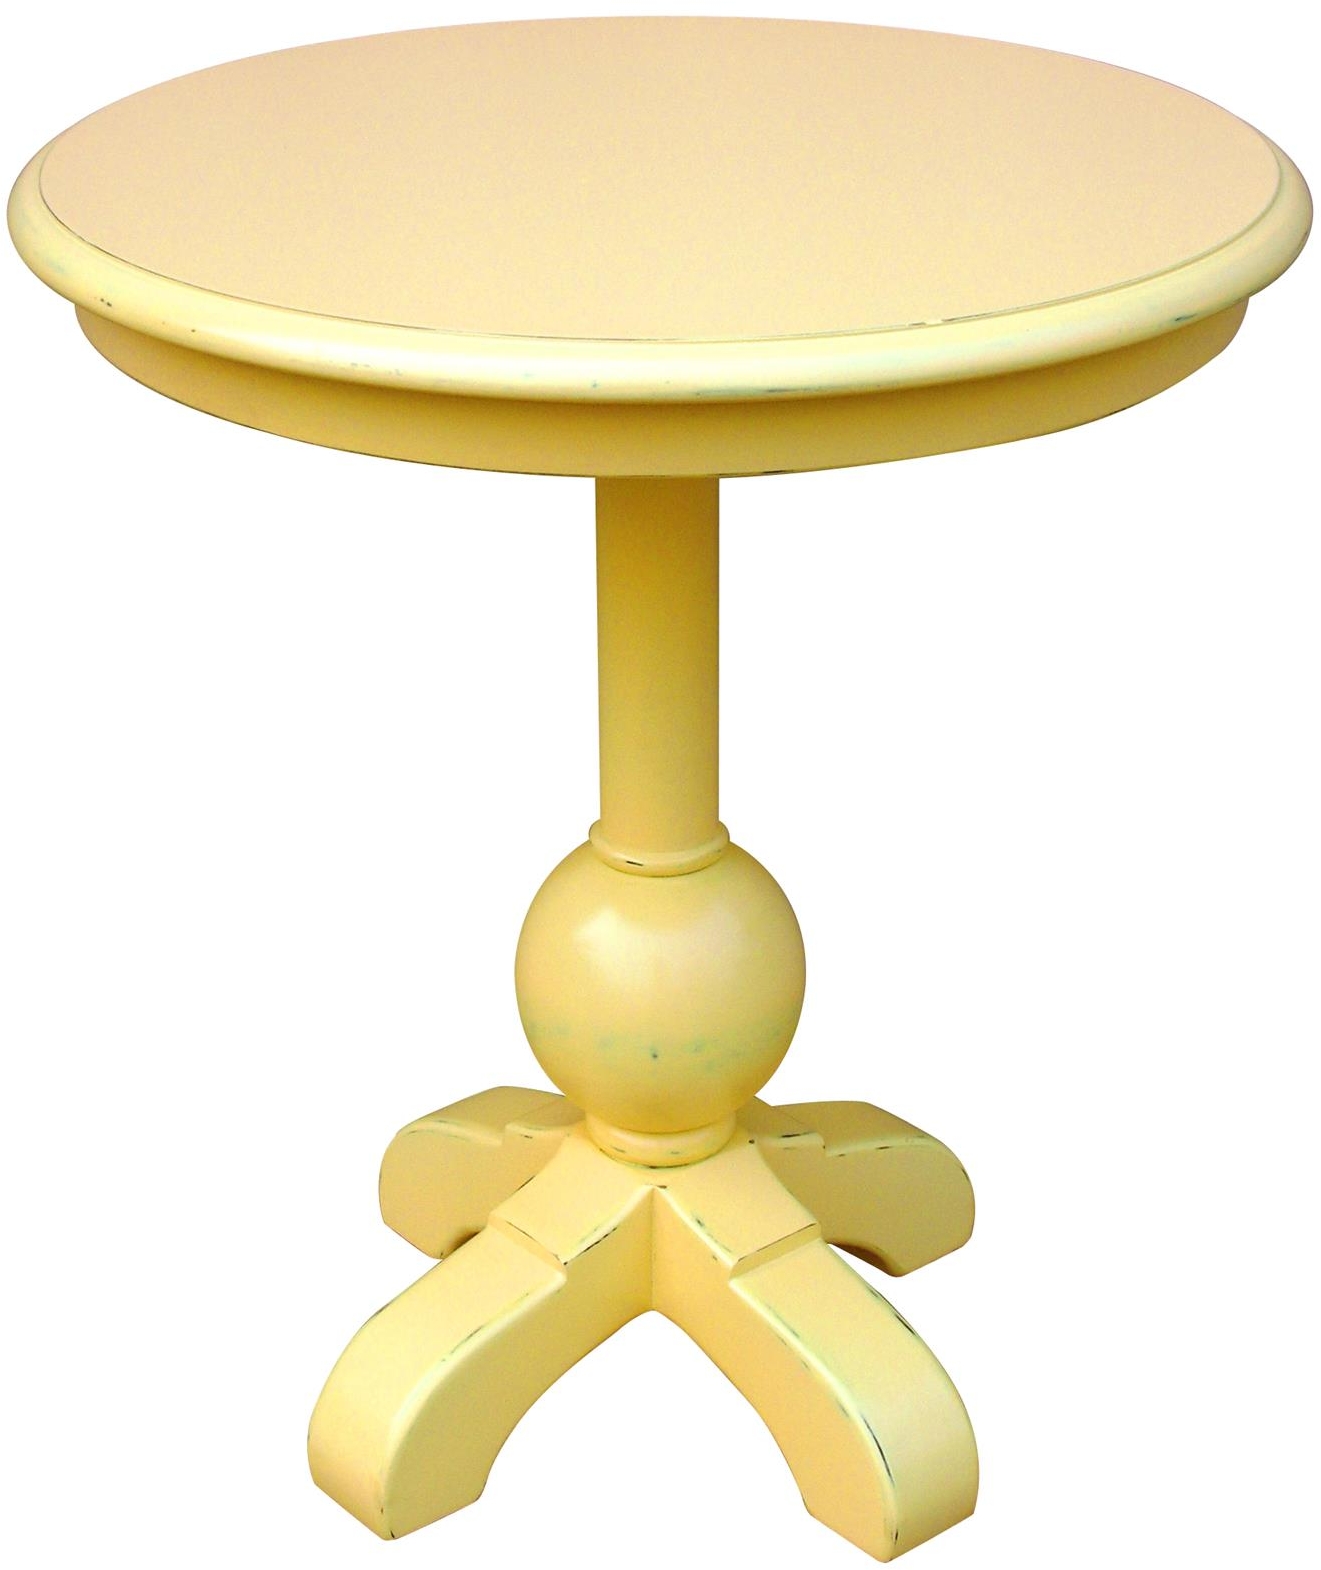 Side Table TRADE WINDS SOHO Traditional Antique Round Yellow Painted Mahogany-Image 1